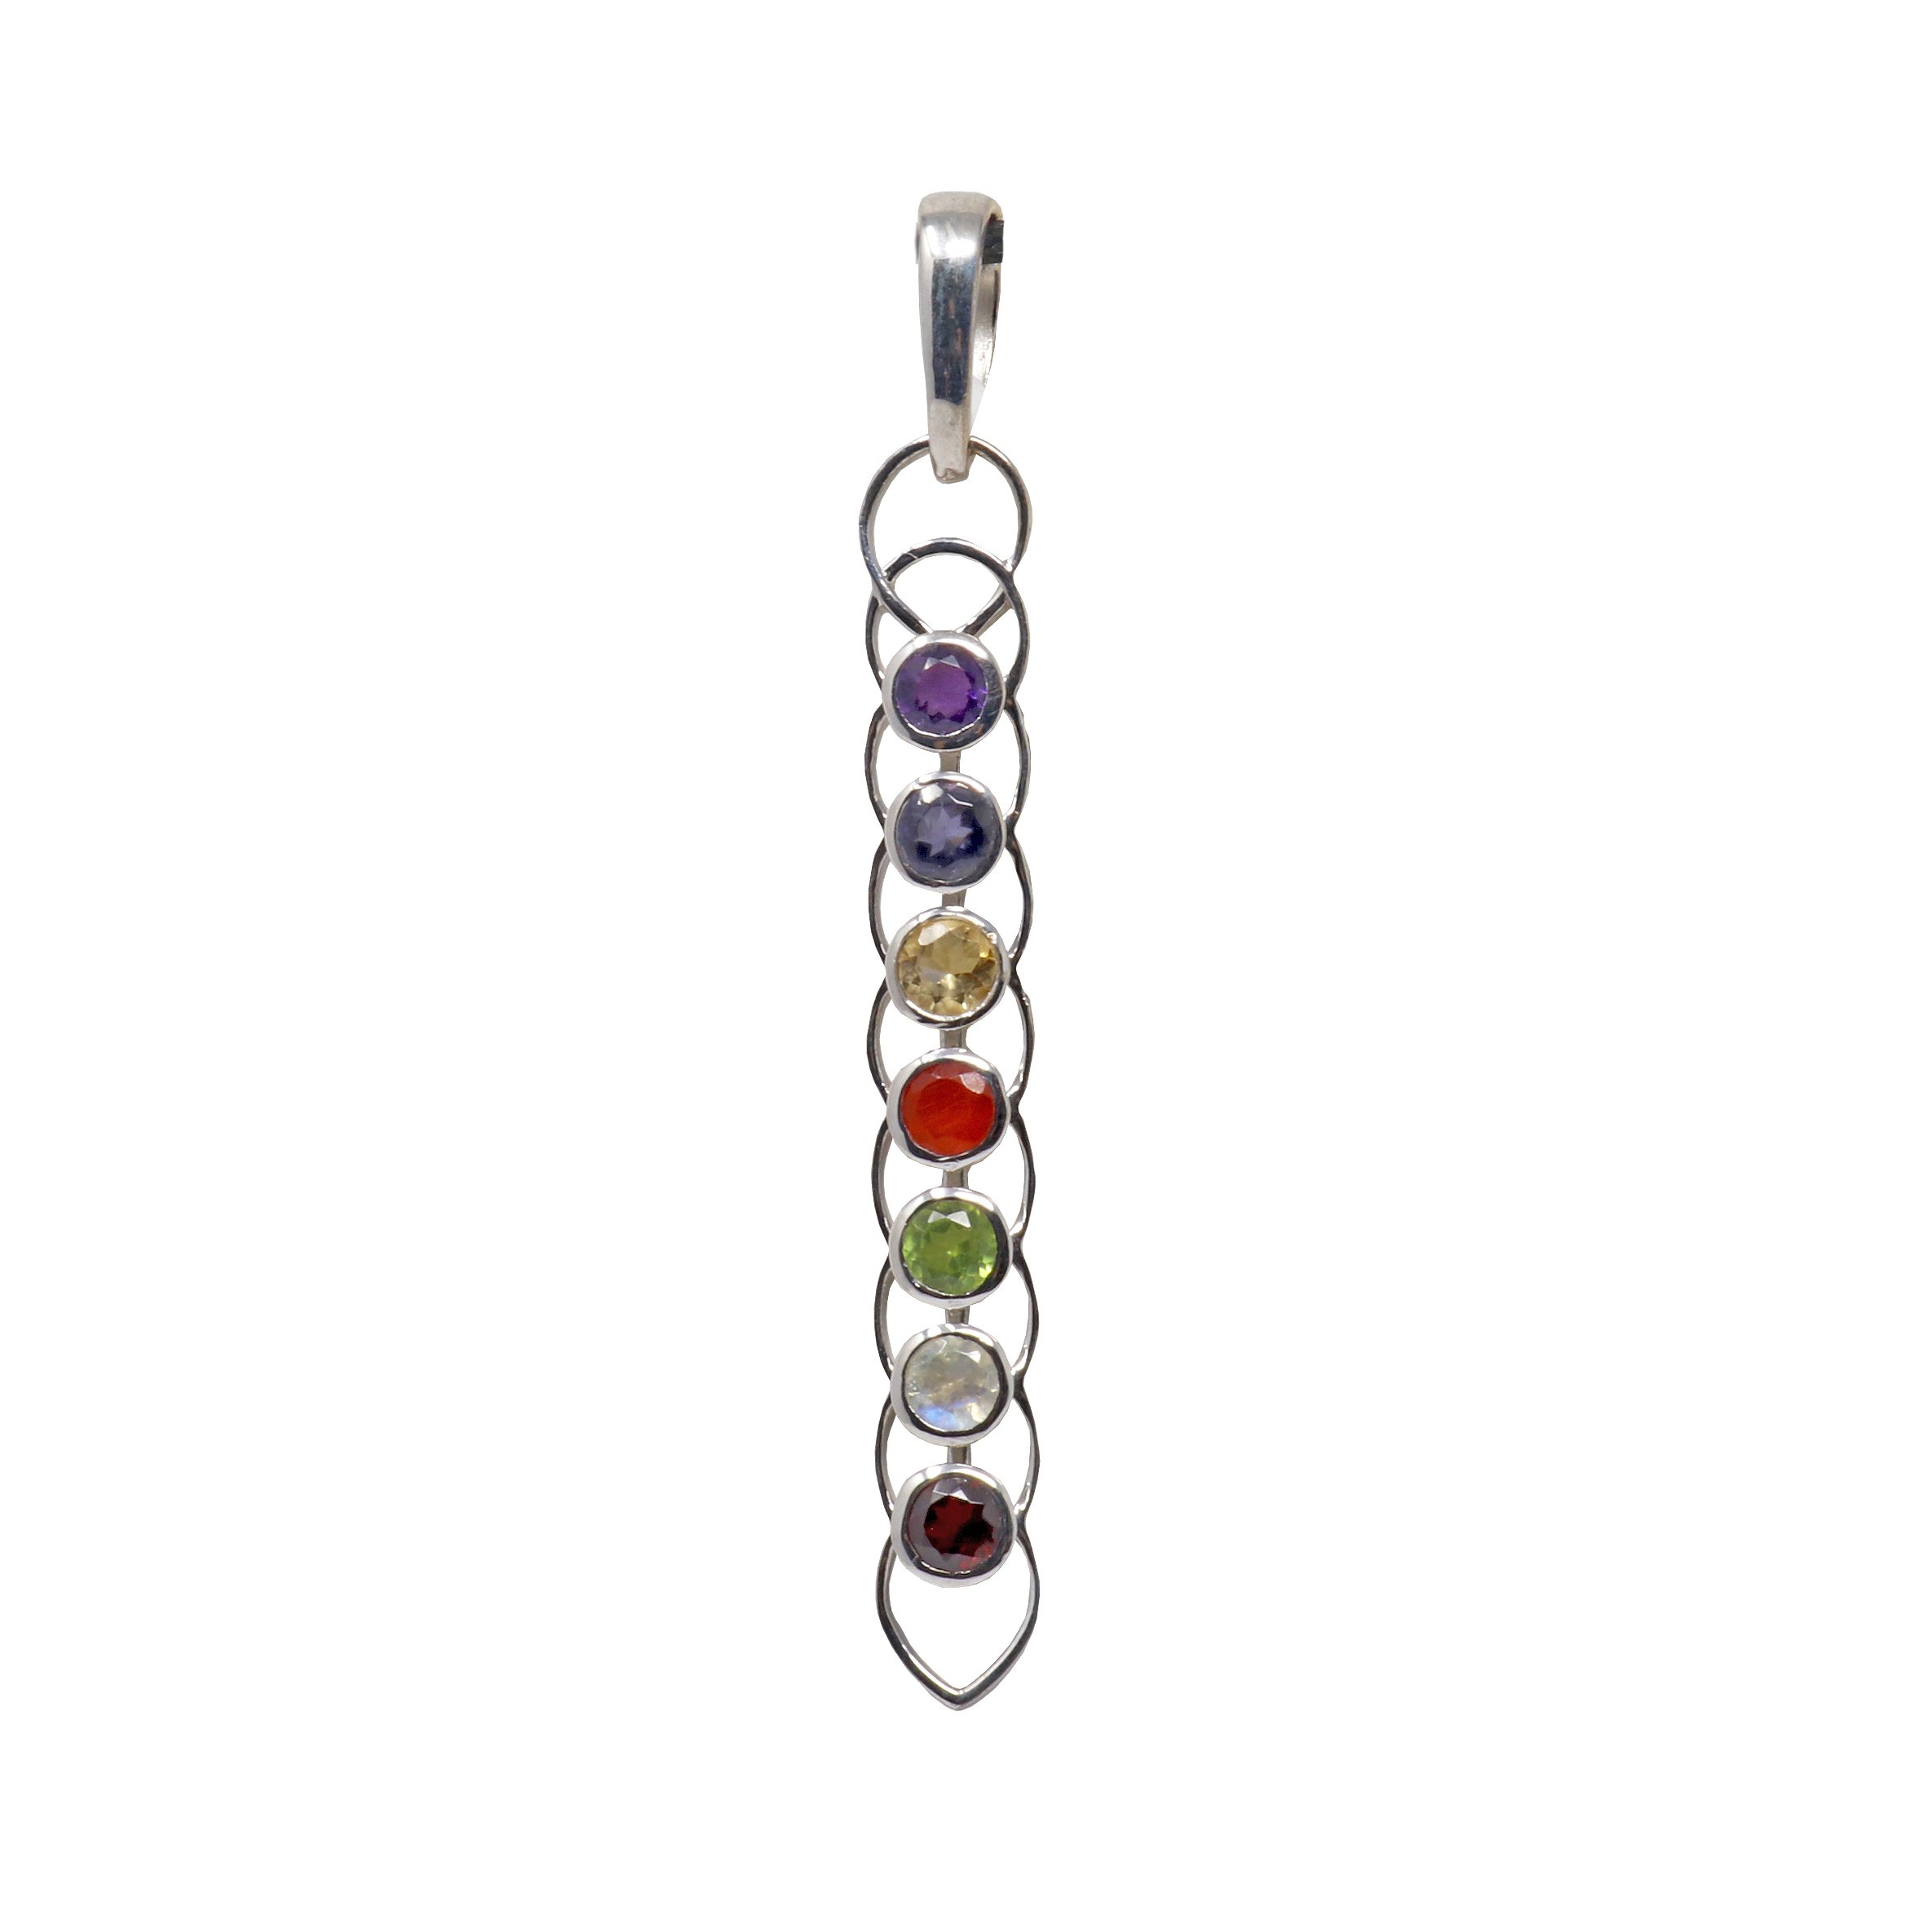 7 Chakra Pendant - 7 Faceted Rounds Set In Layered Vertical Silver Loop Design